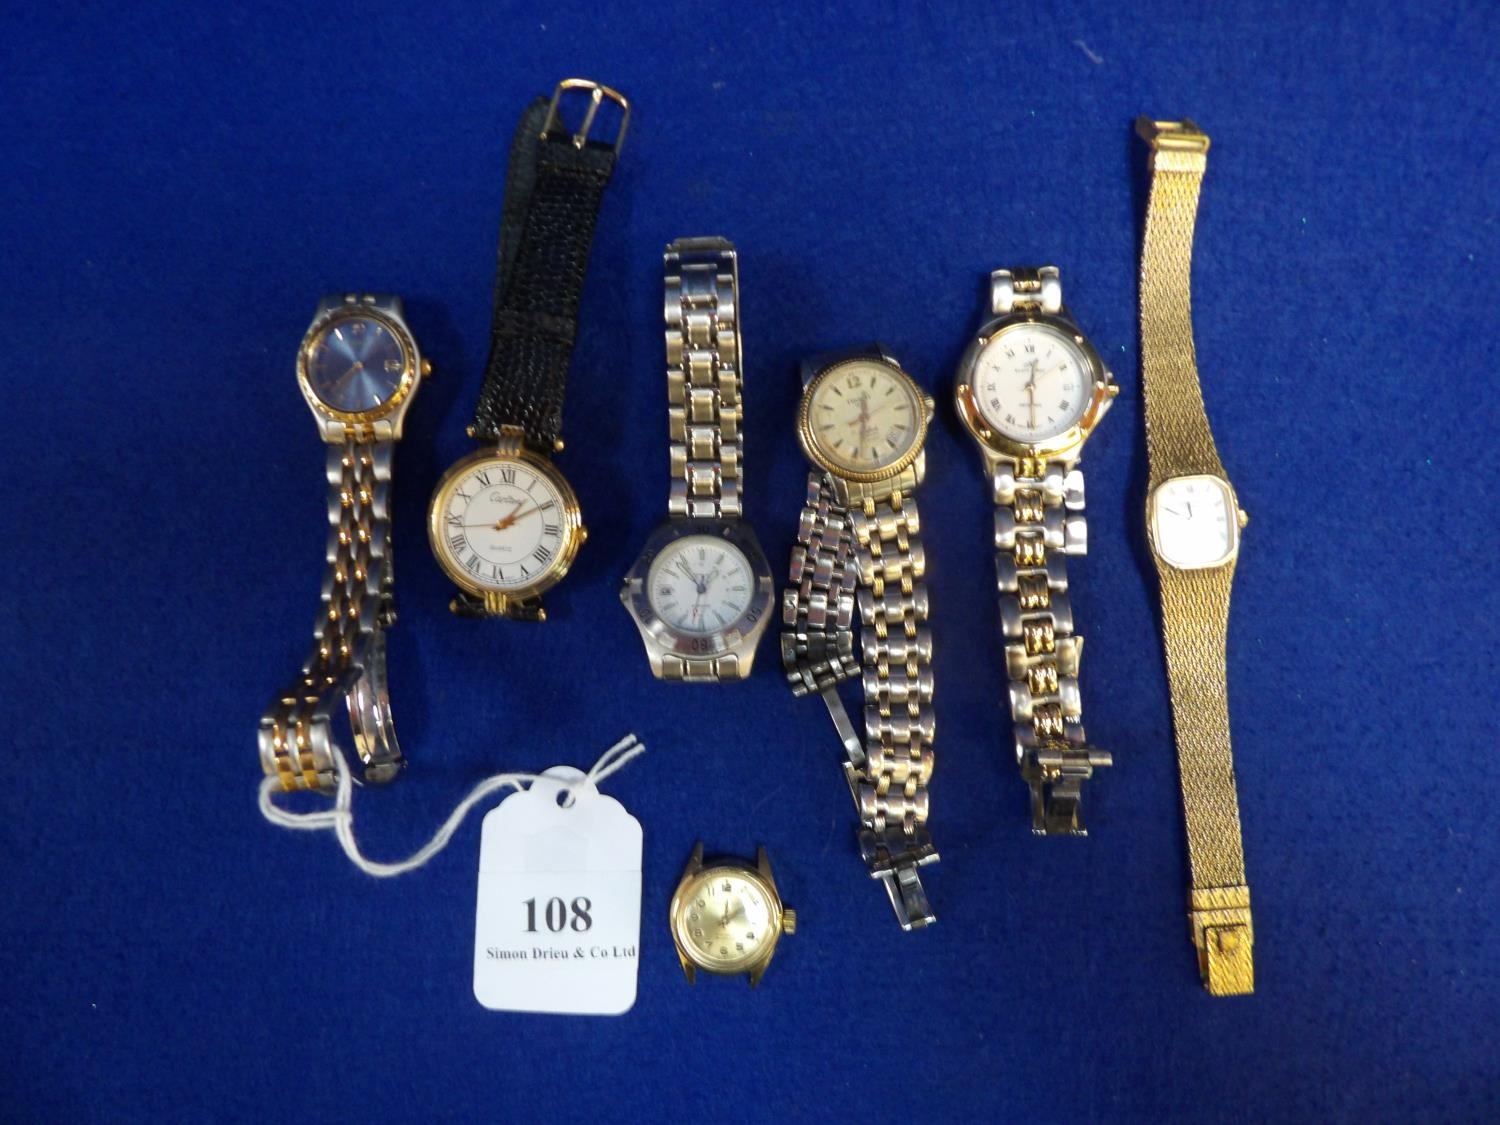 A collection of six watches by Seiko, Sekonda, Claus Kobec and other makers